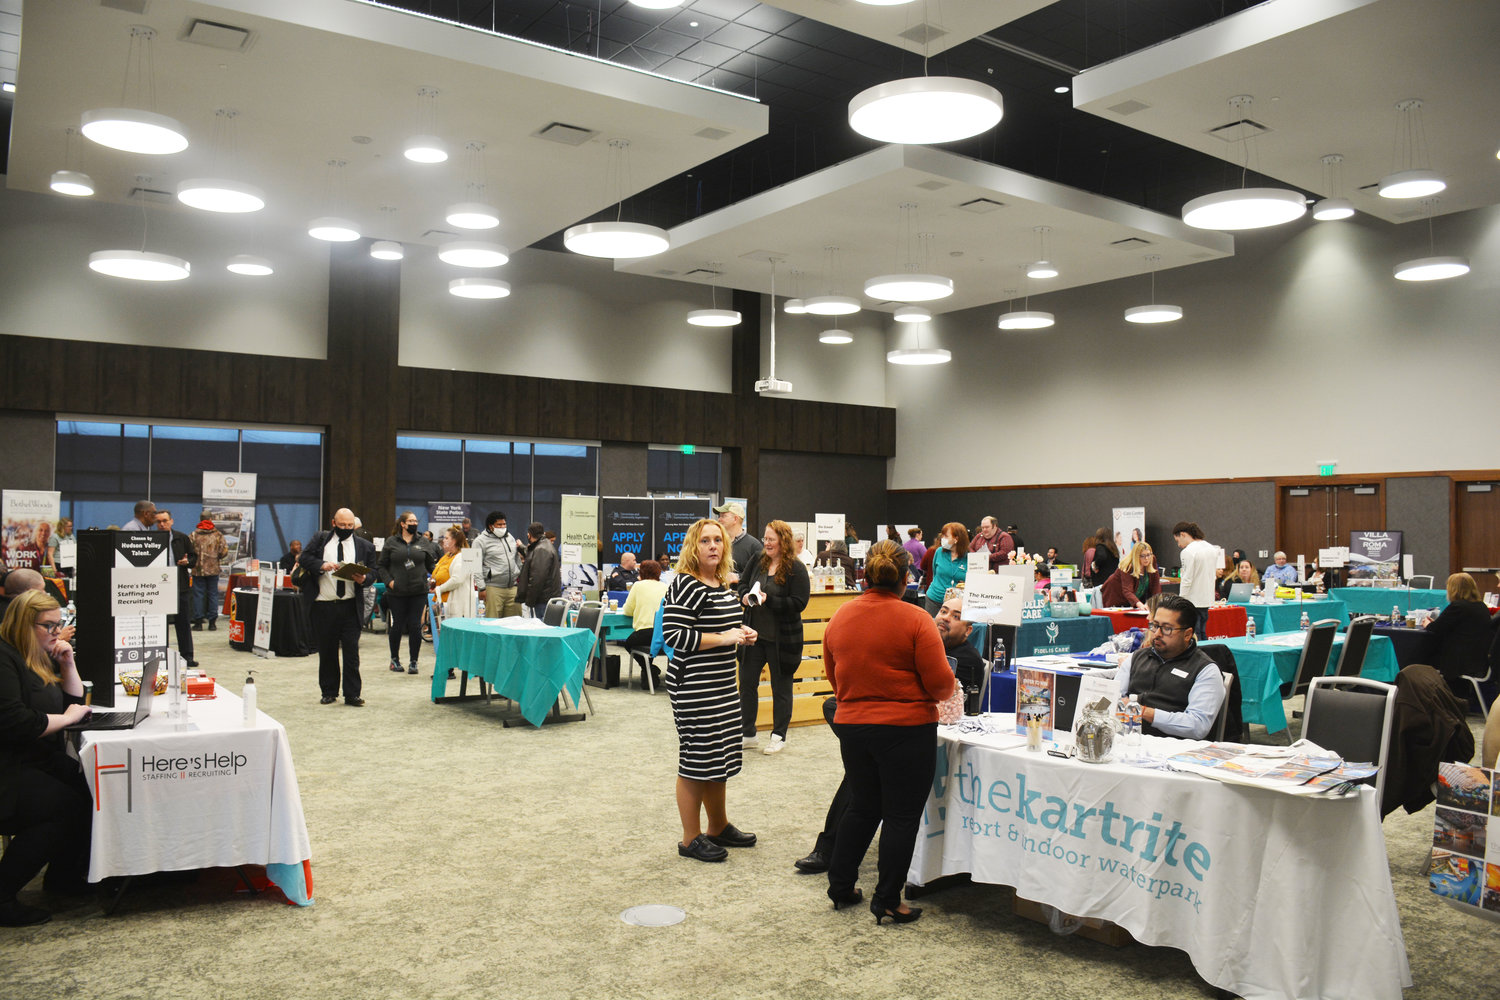 The ballroom at Kartrite Resort and Indoor Waterpark was filled with job seekers and eager employers at Wednesday’s Sullivan County Job Fair.